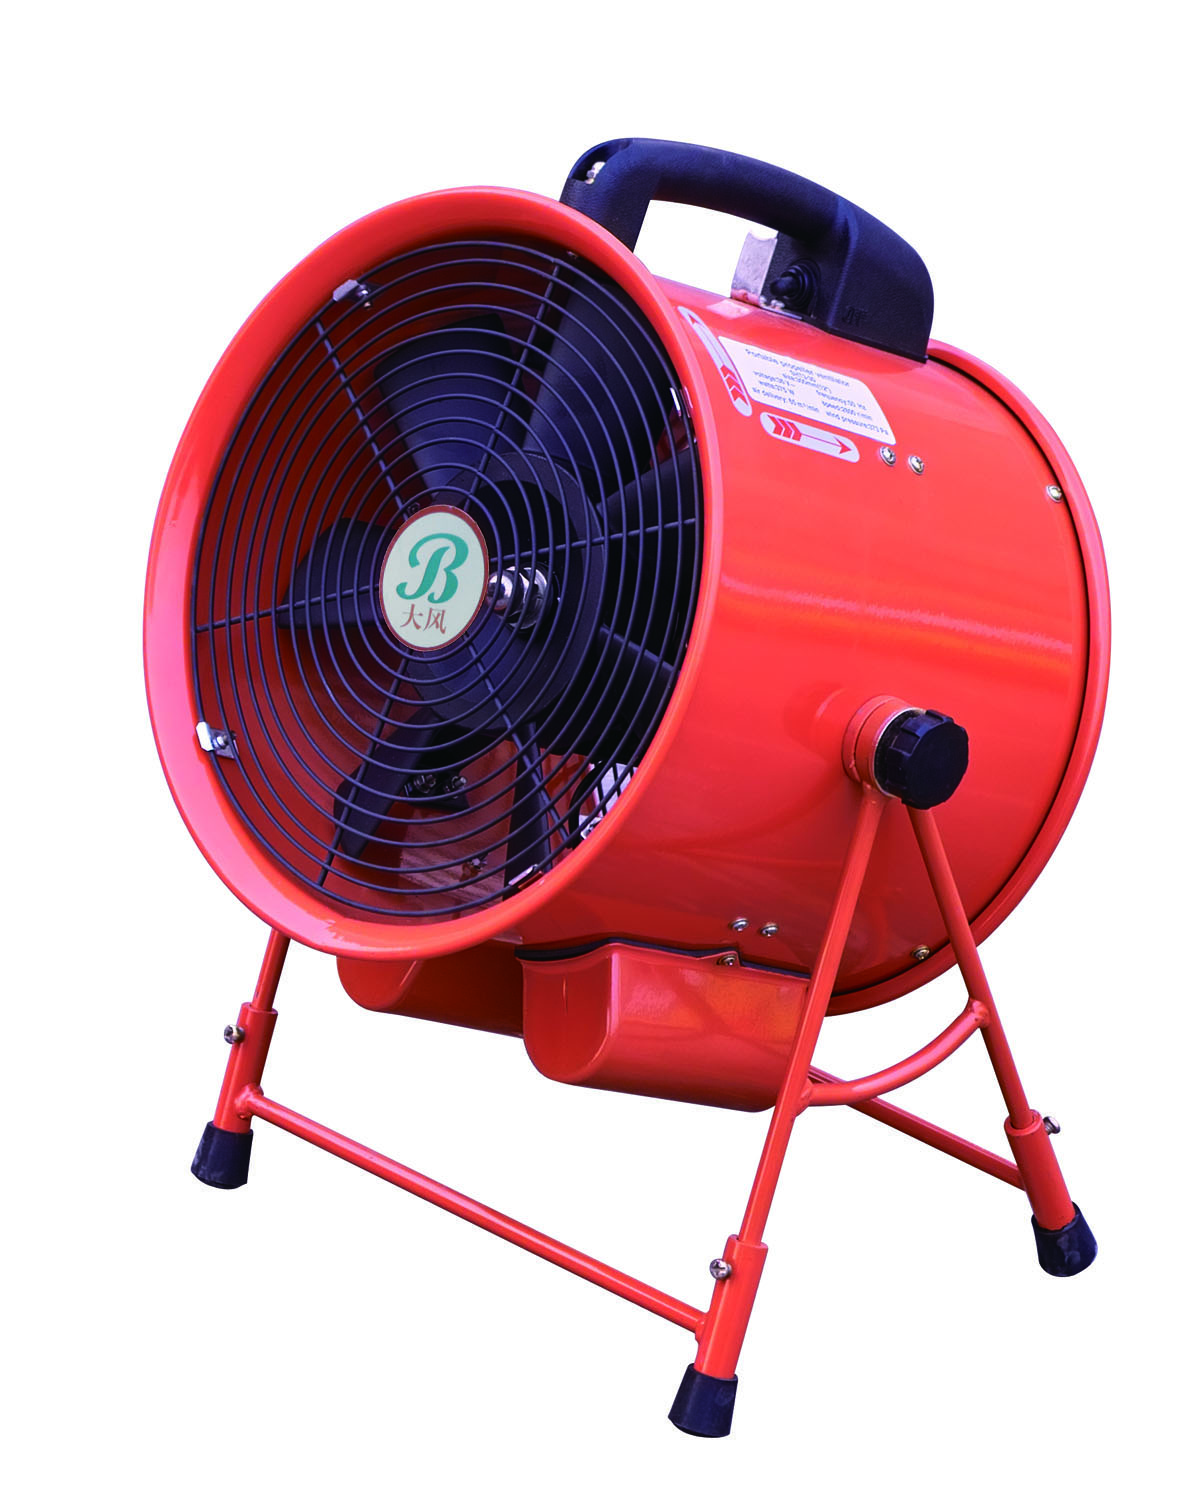 A style adjustable blower